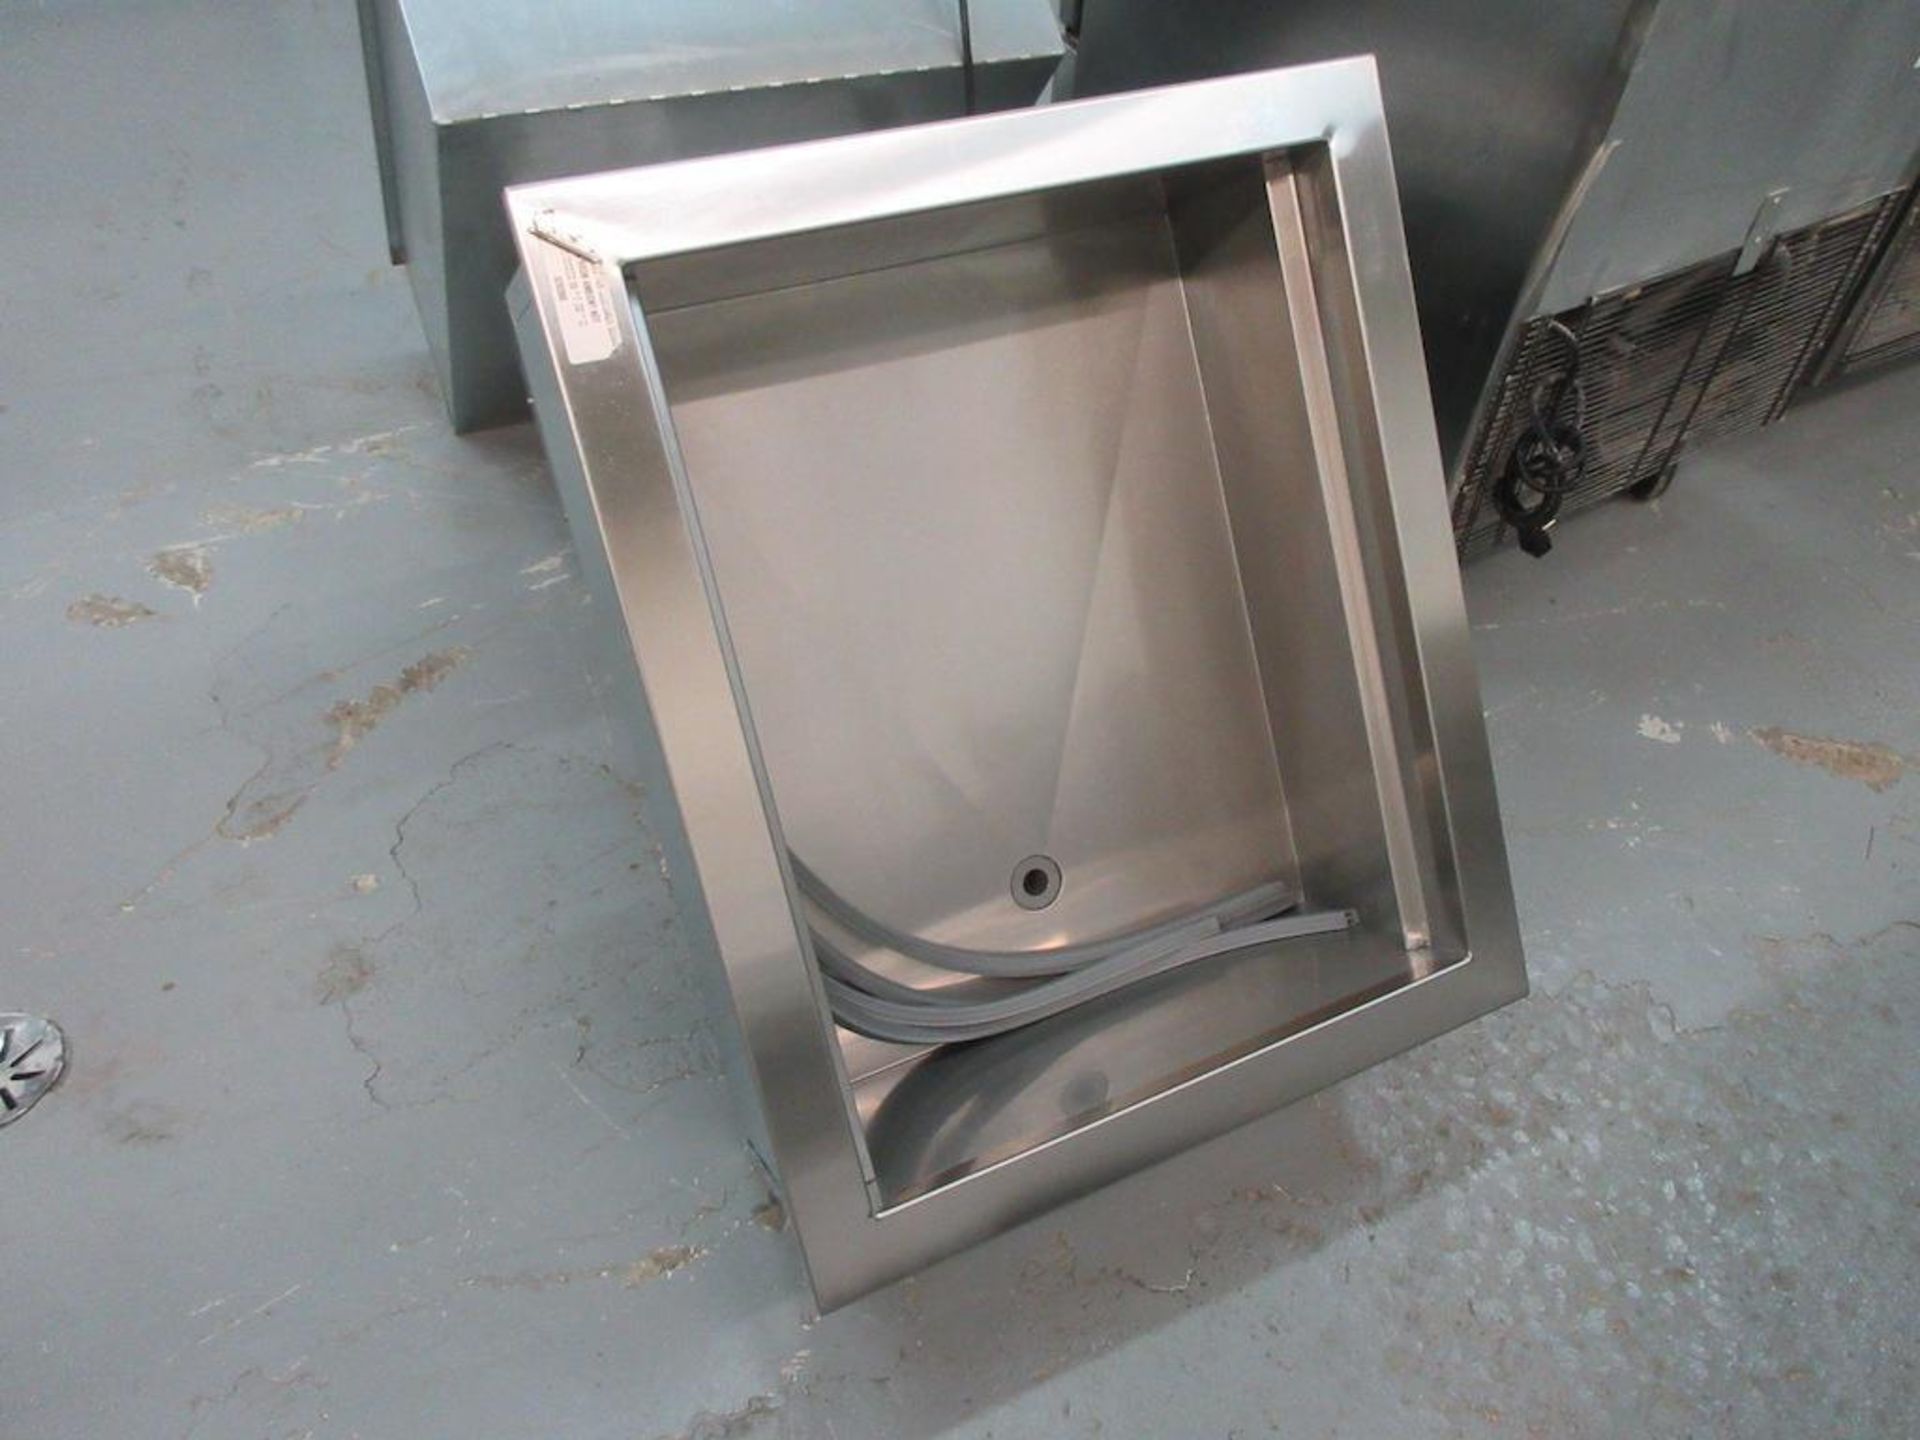 Delfield Manitowoc counter drop in refrigerated cold well, model N8130B, 21.5" x 26" x 9.5", sn 1501 - Image 2 of 5